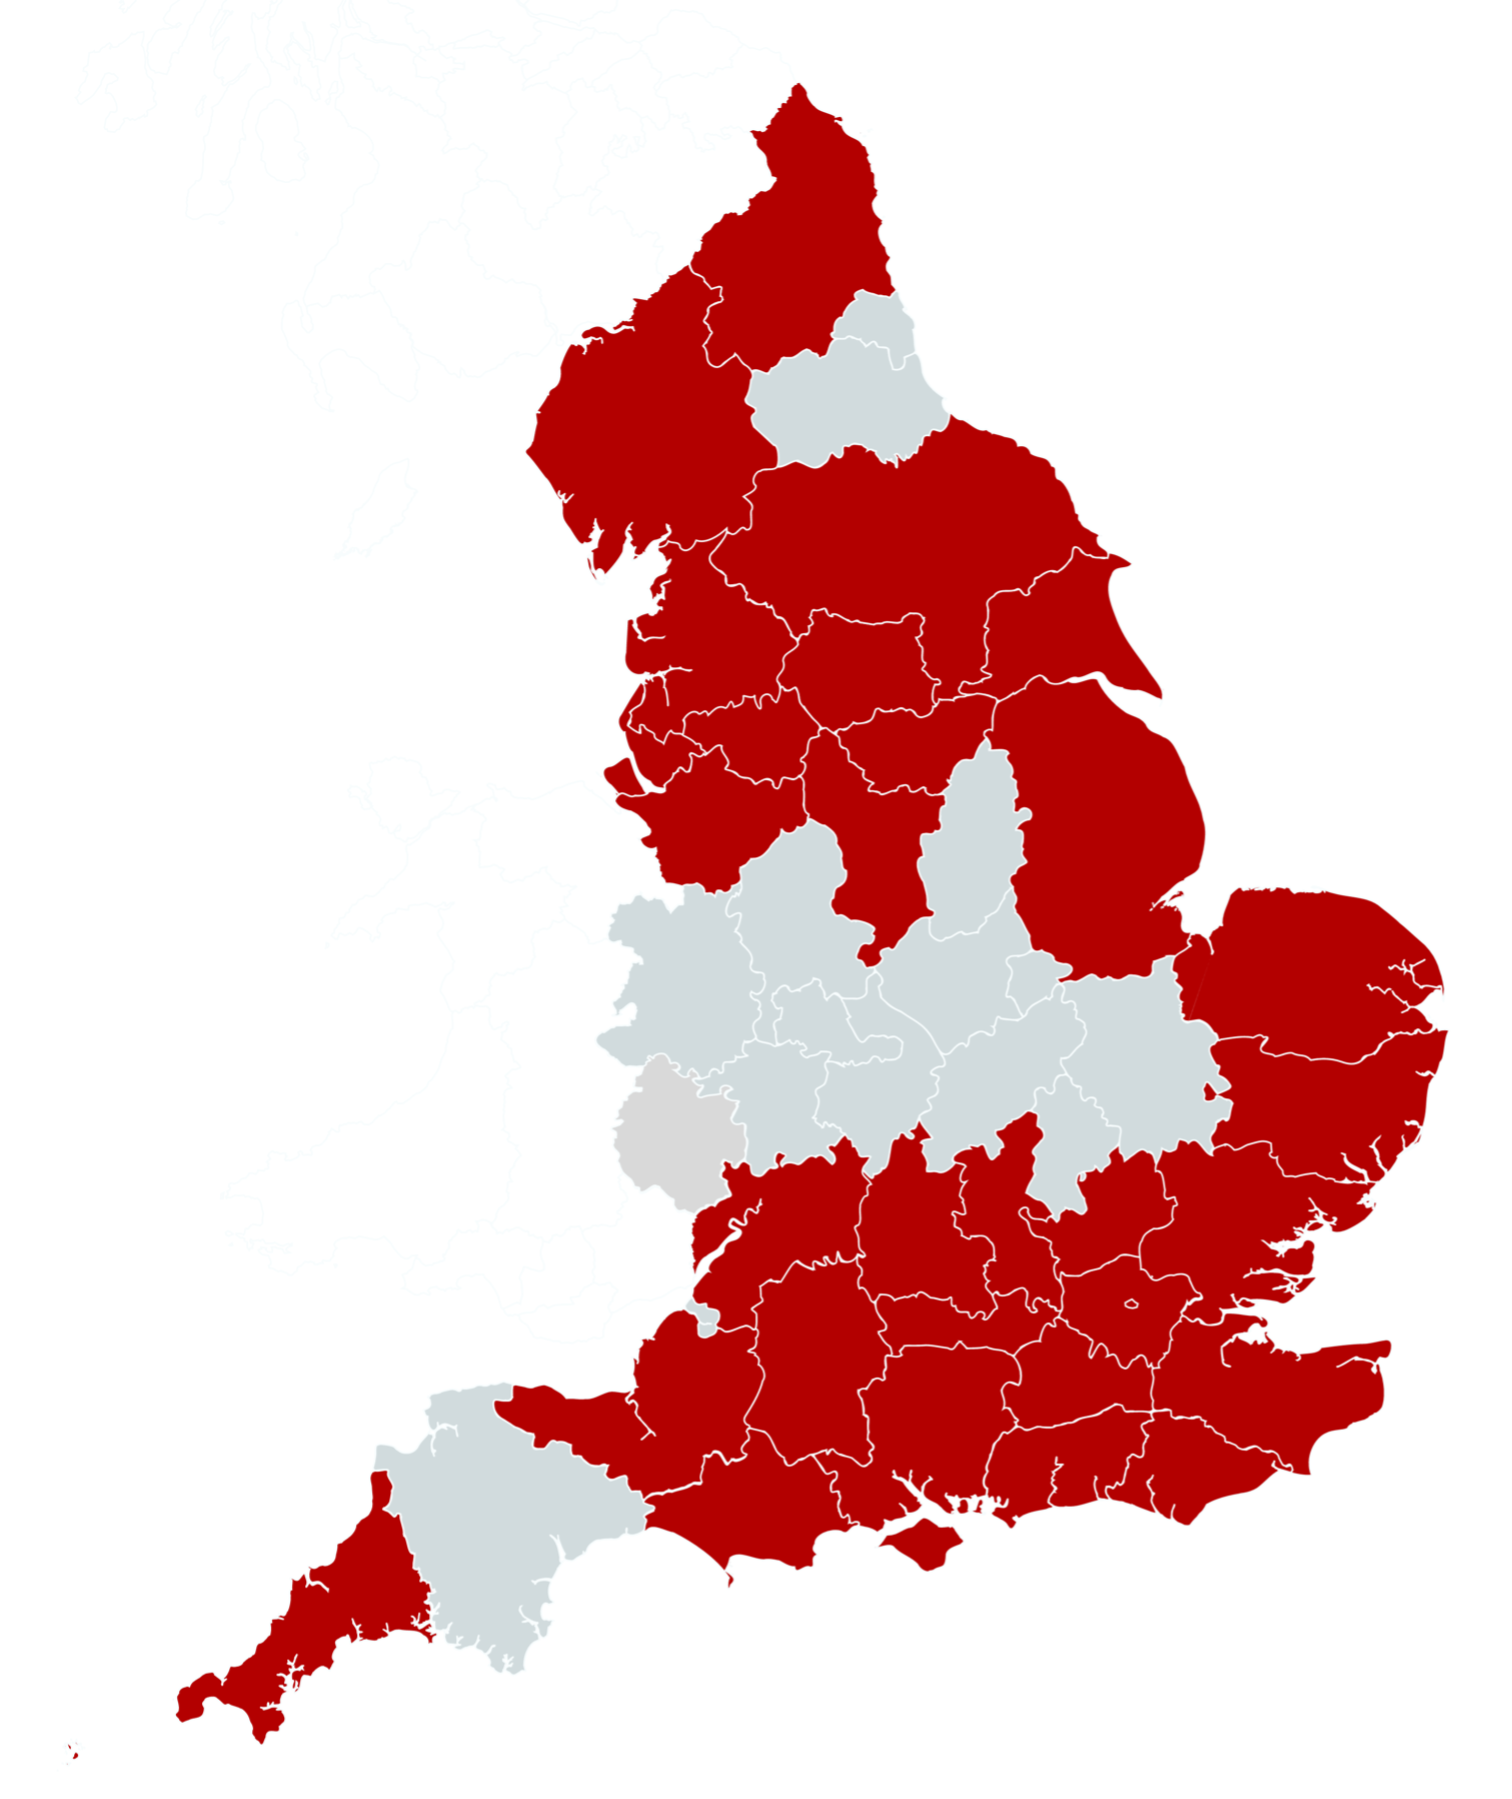 Map of England showing regions covered by UEC role interviews. Red areas show where we interviewed at least 1 person from that region.